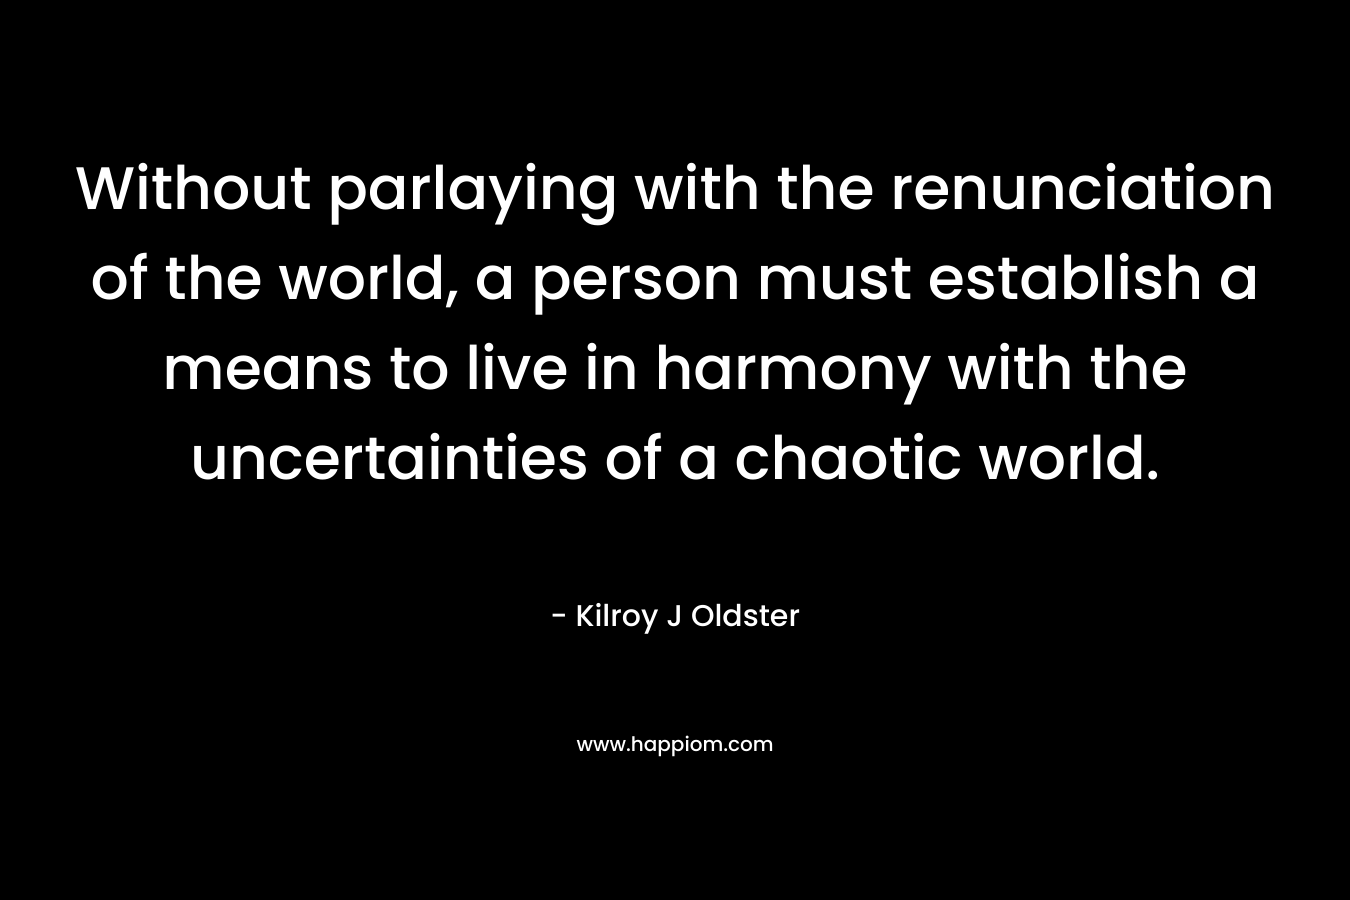 Without parlaying with the renunciation of the world, a person must establish a means to live in harmony with the uncertainties of a chaotic world. – Kilroy J Oldster